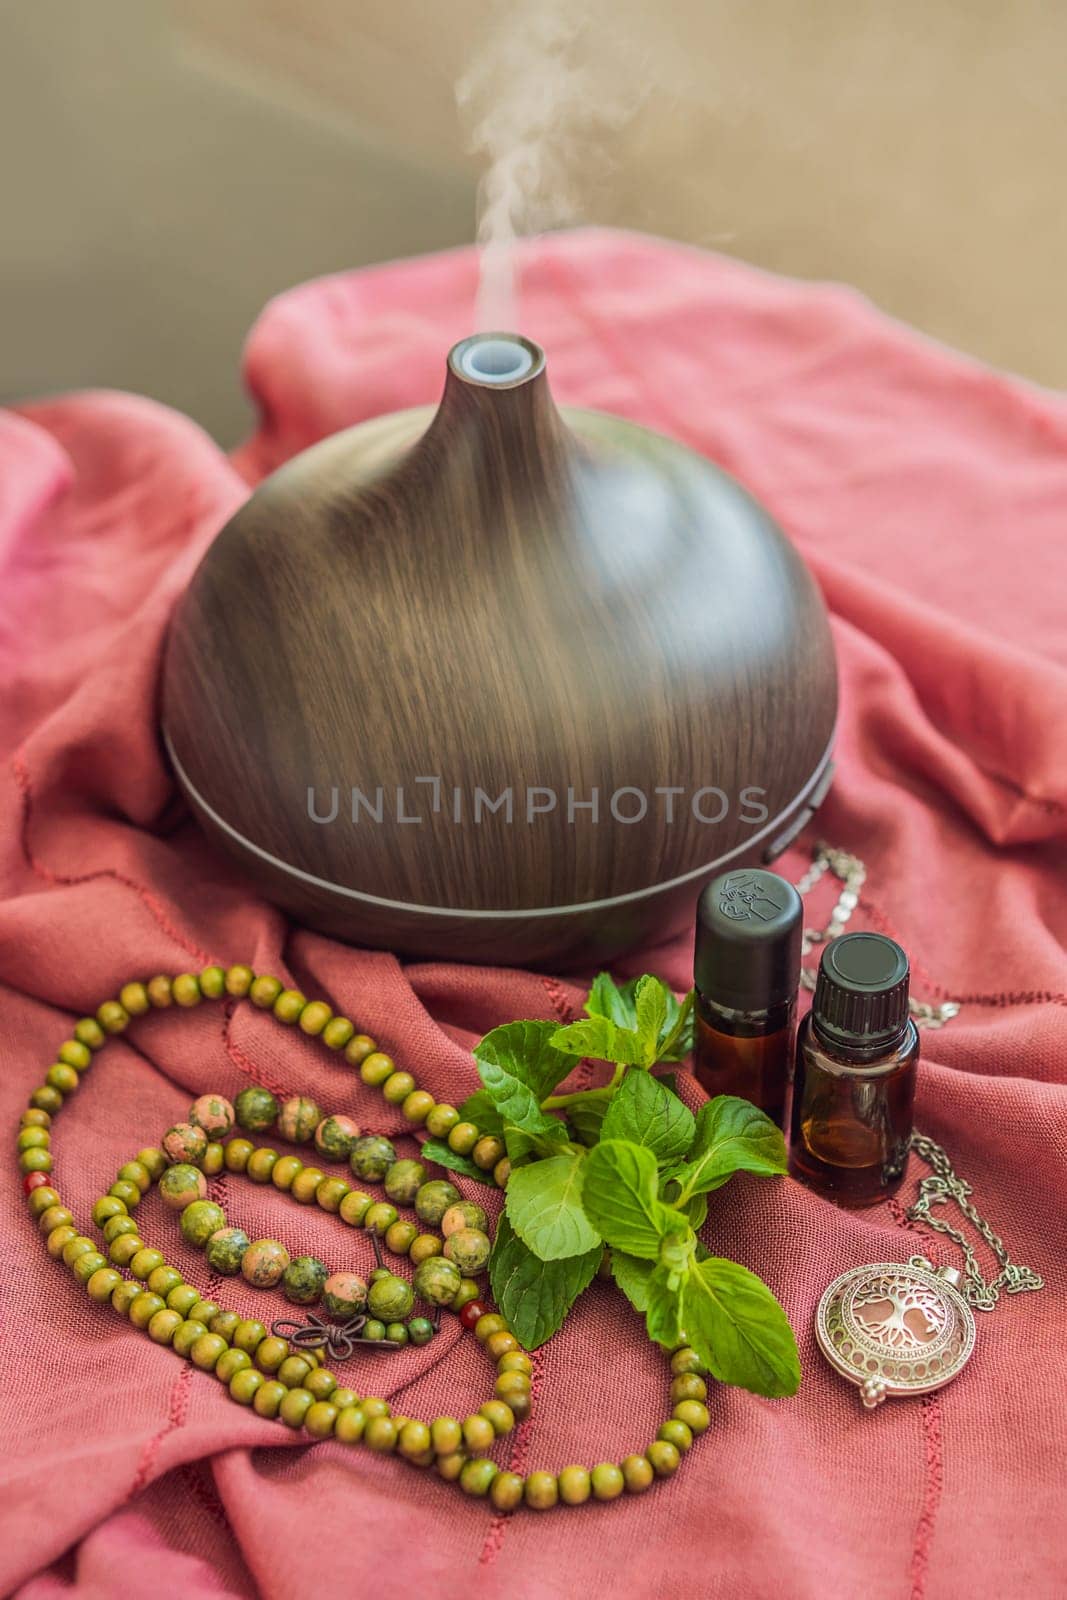 A captivating photo capturing the essence of relaxation and ambiance with an aroma oil and aroma diffuser, creating a soothing and serene atmosphere.